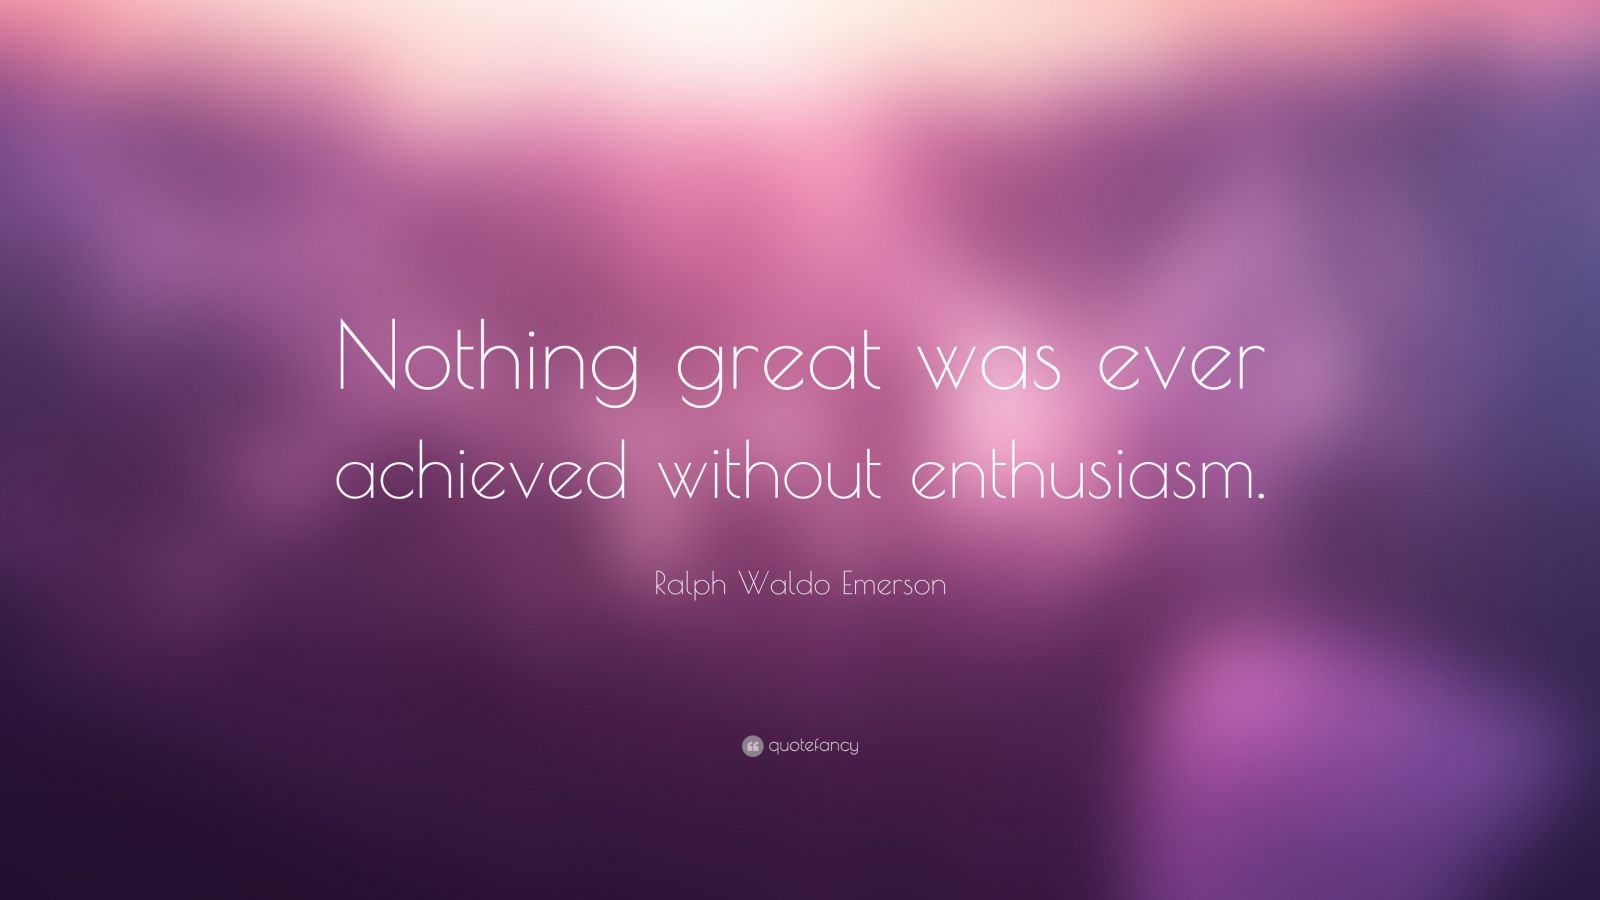 Ralph Waldo Emerson Quotes (28 wallpapers) - Quotefancy